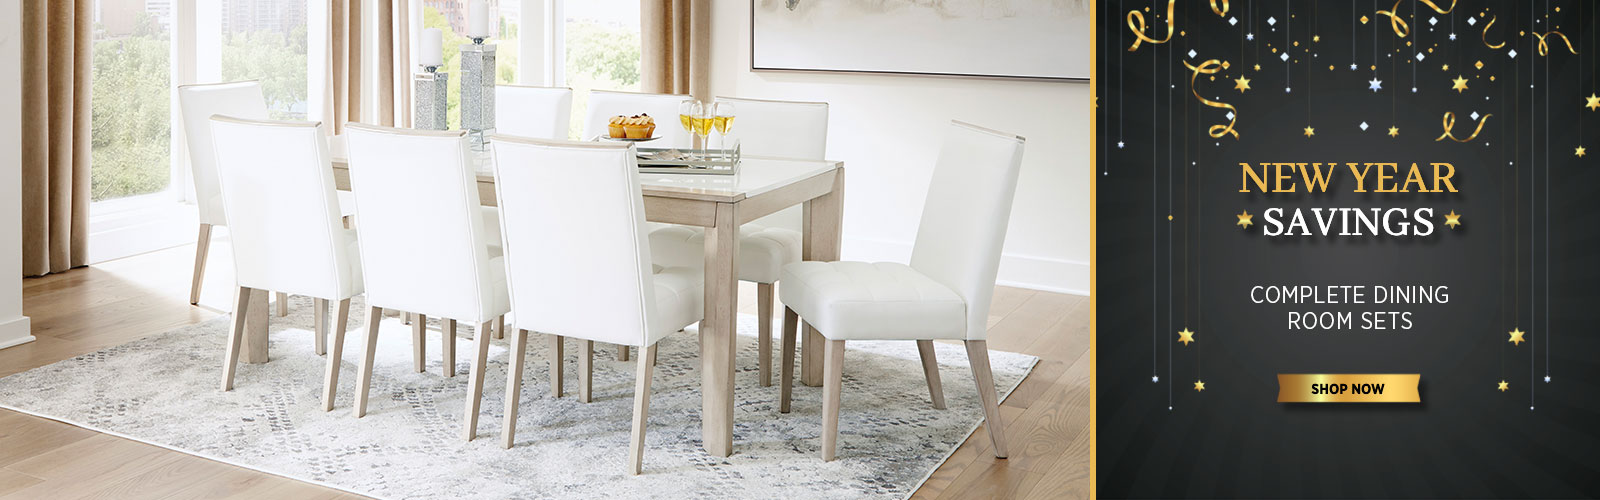 New Years Savings - Complete Dining Room Sets - Shop Now